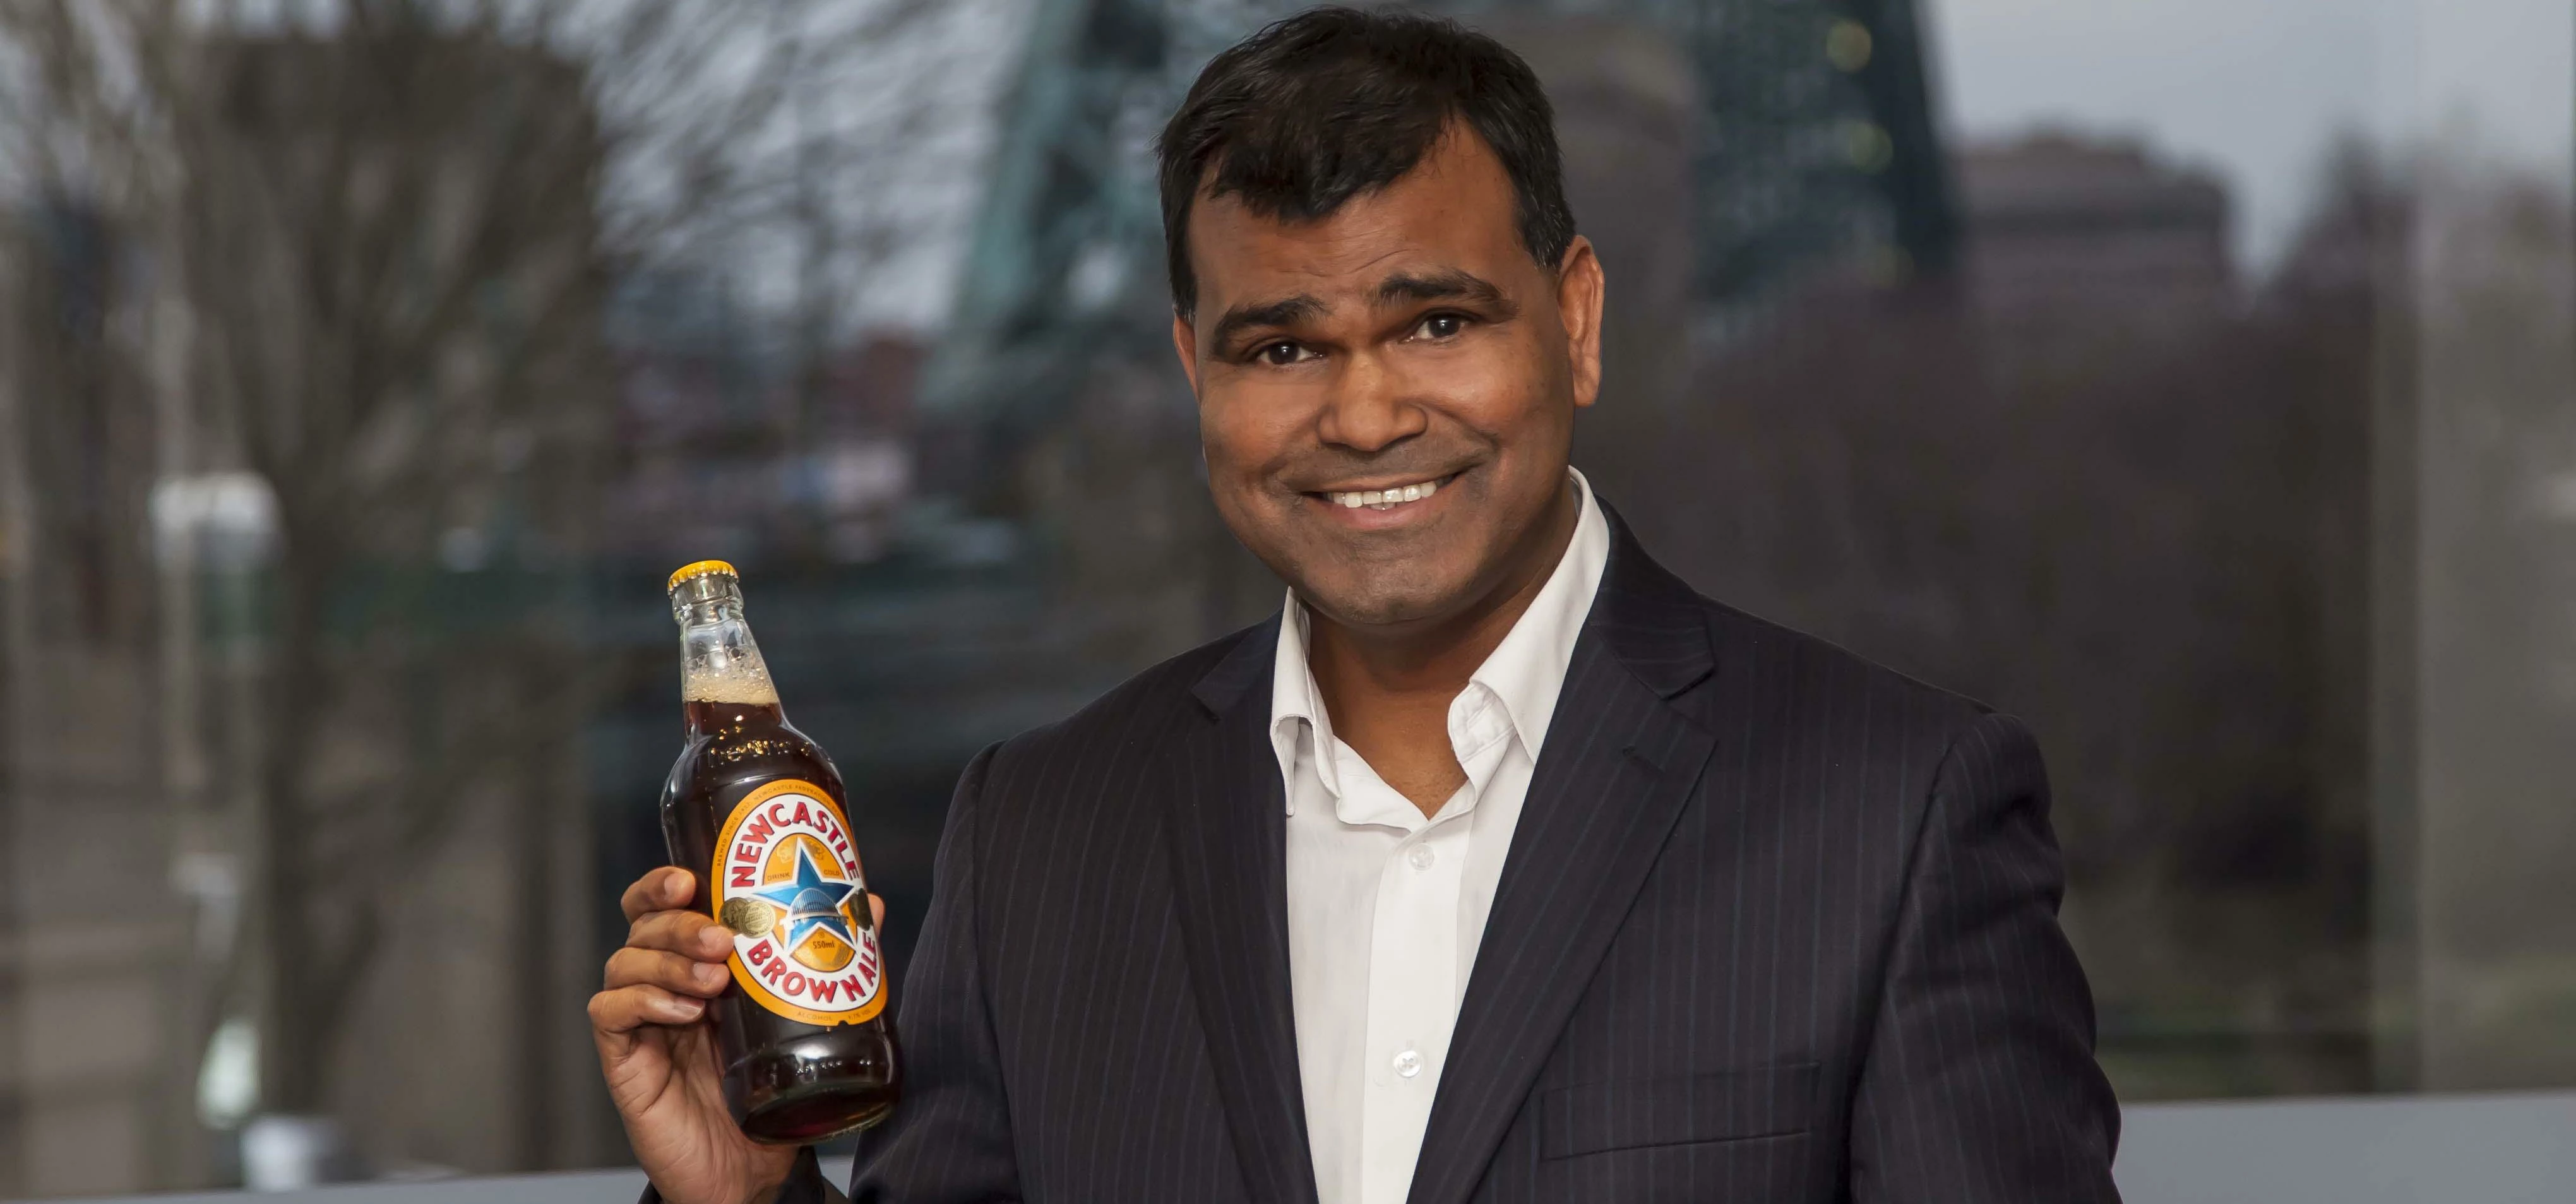 Avi Malik's restaurant Raval will be serving Newcastle Brown Ale Curry at a charity event this Sunda